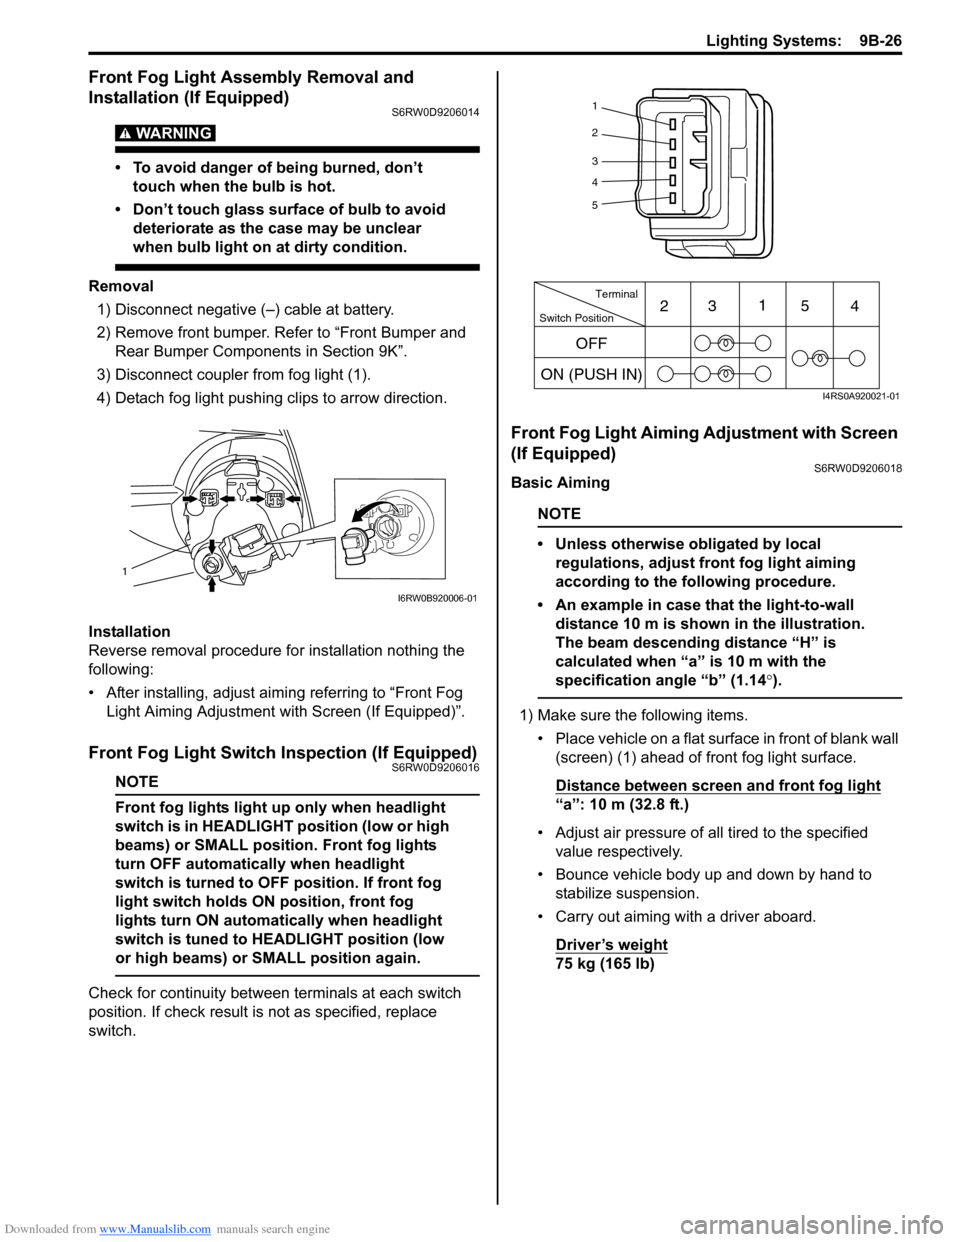 SUZUKI SX4 2006 1.G Service Workshop Manual Downloaded from www.Manualslib.com manuals search engine Lighting Systems:  9B-26
Front Fog Light Assembly Removal and 
Installation (If Equipped)
S6RW0D9206014
WARNING! 
• To avoid danger of being 